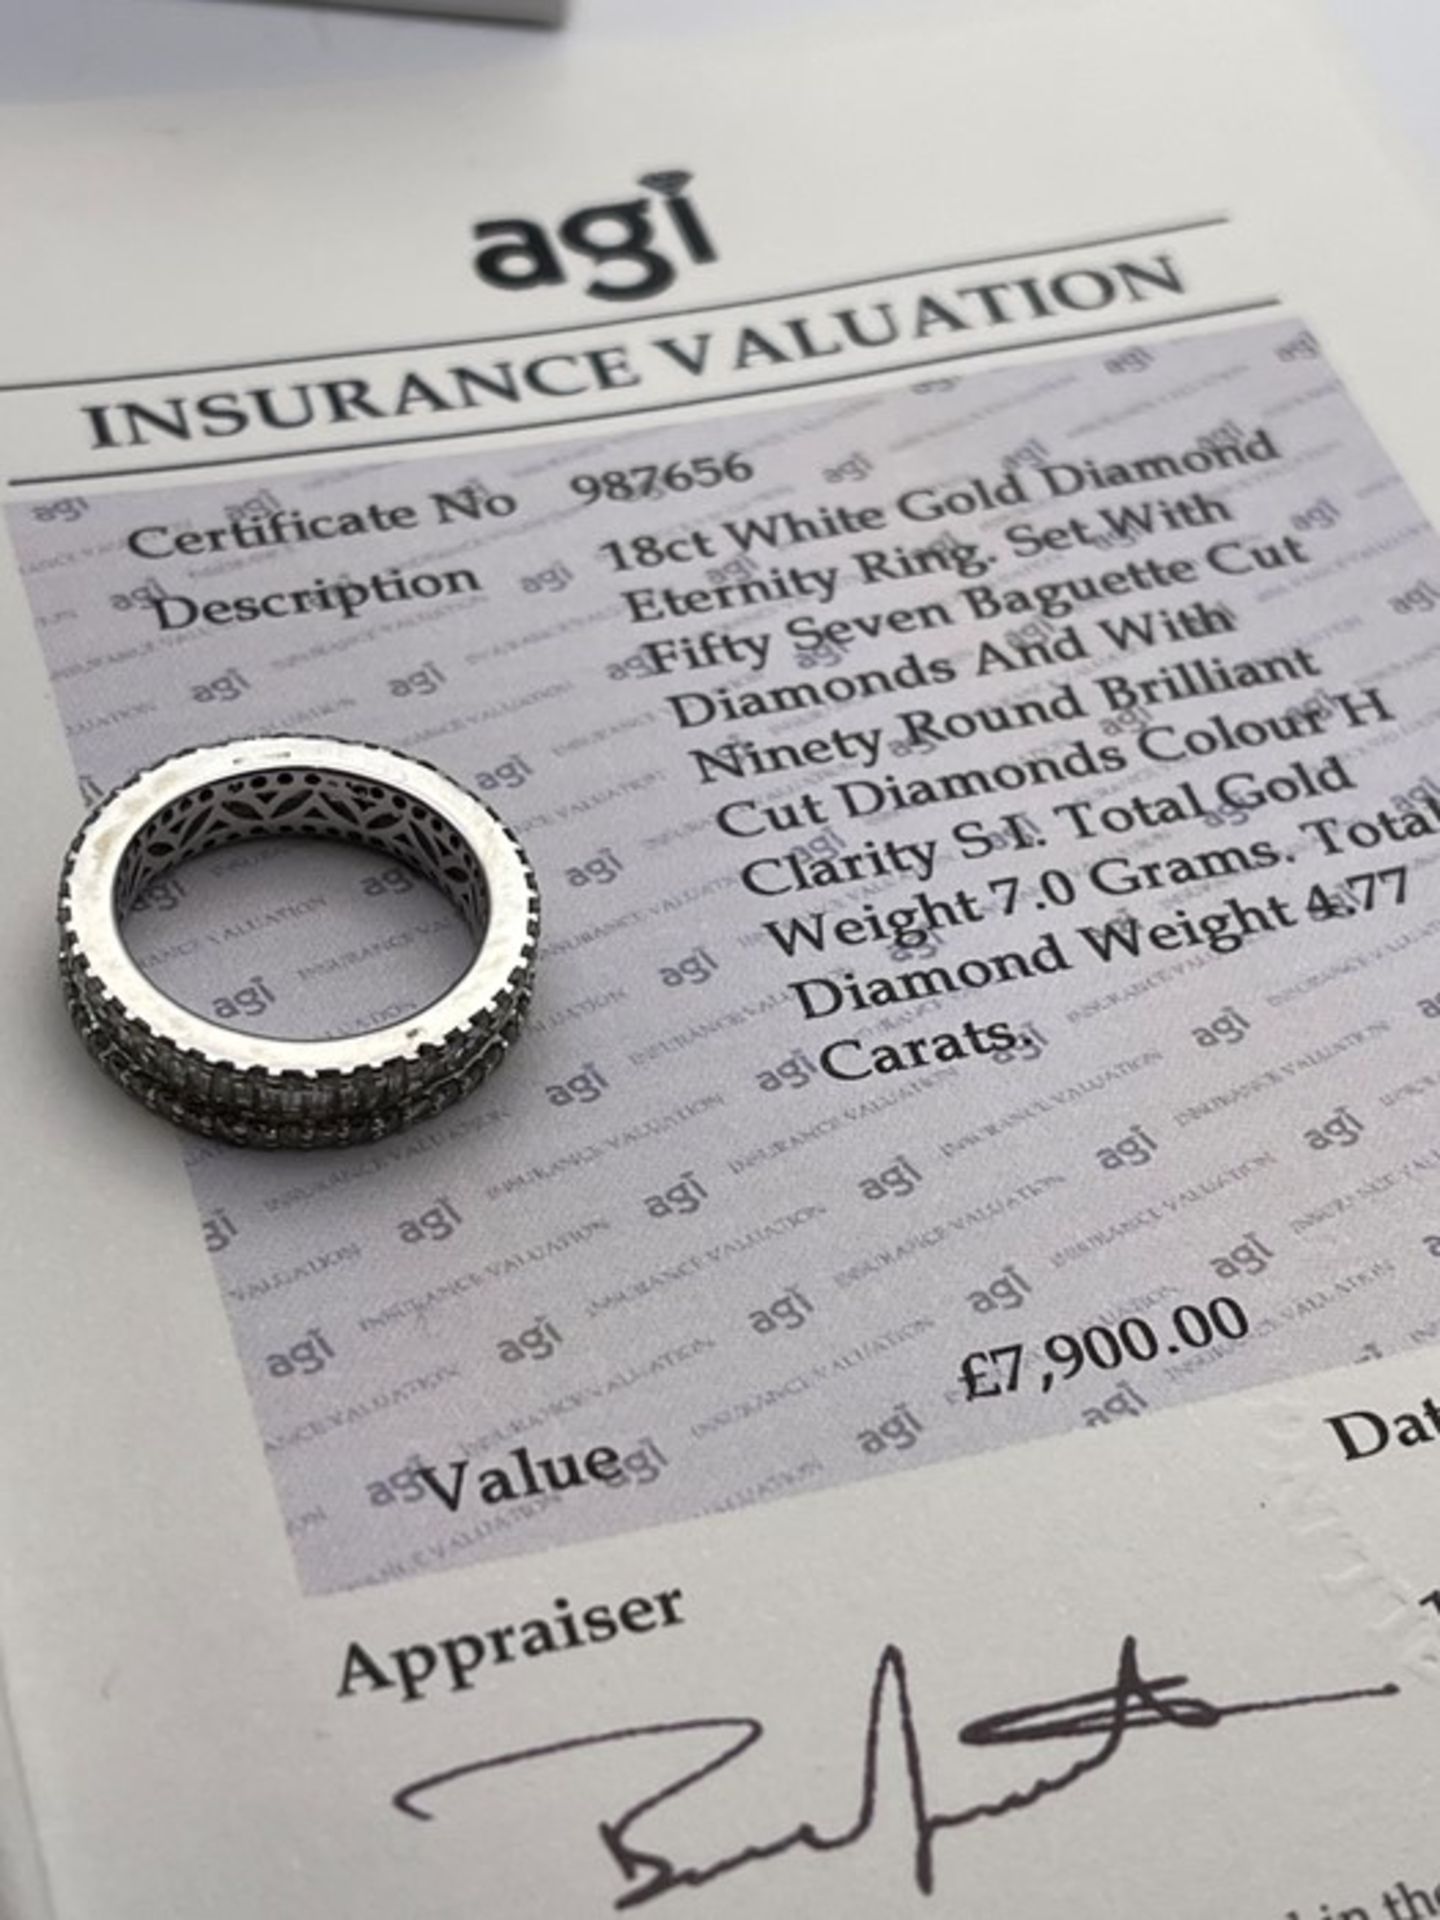 ***£7900.00*** 18CT WHITE GOLD DIAMOND FULL ETERNITY RING, SET WITH FIFTY SEVEN BAGUETTE CUT - Image 5 of 5